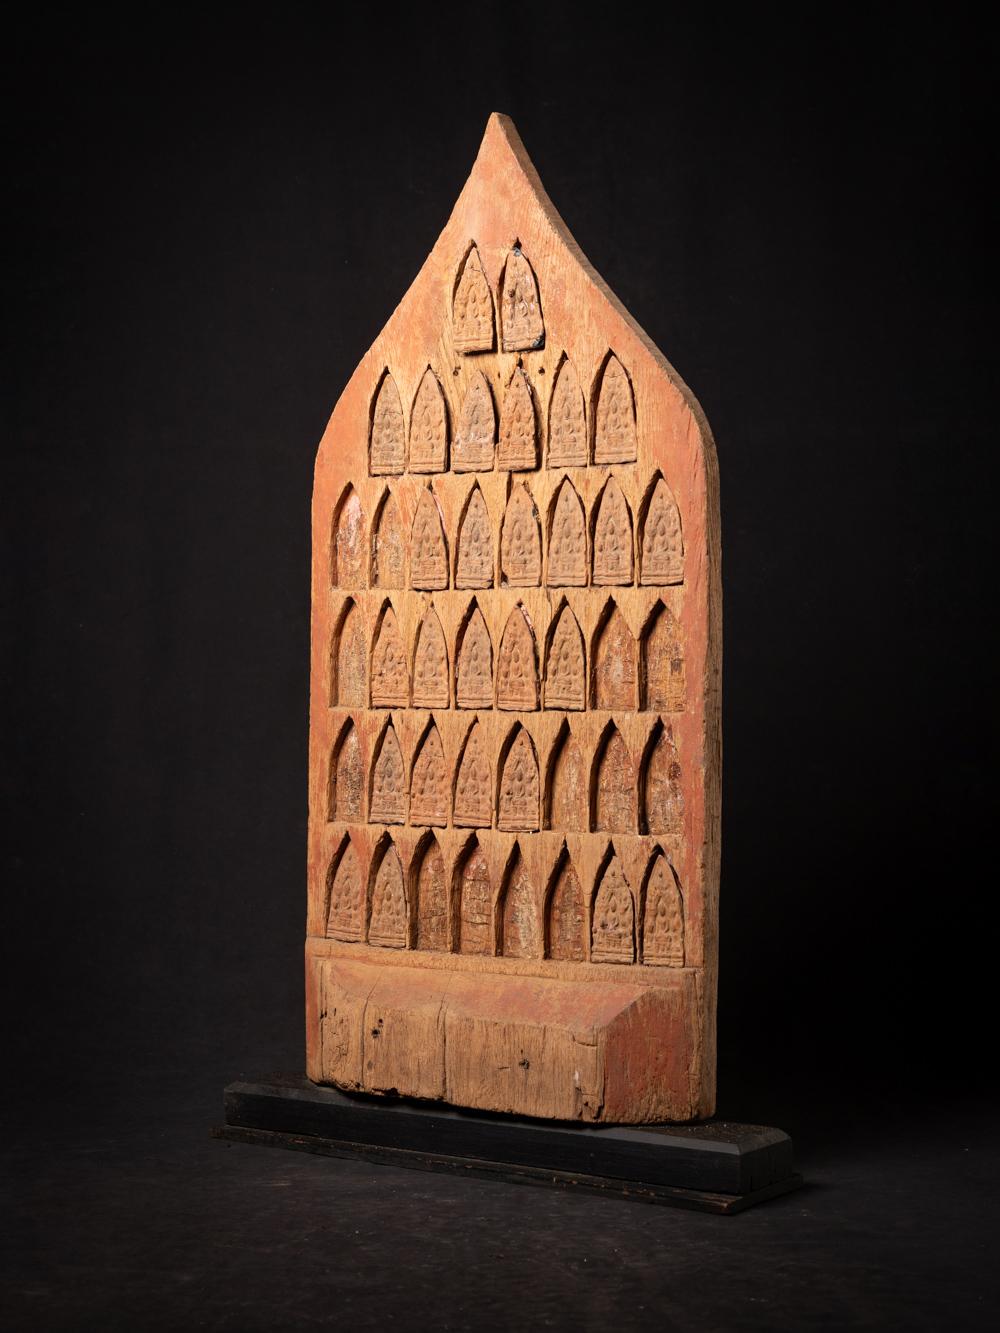 Antique wooden Burmese Temple panel
Material : wood
102,1 cm high
60,3 cm wide and 13,6 cm deep
18th century
With terracotta Buddha amulets
The Buddha amulets are dating from the 14-15th century and were later added in the panel, very special